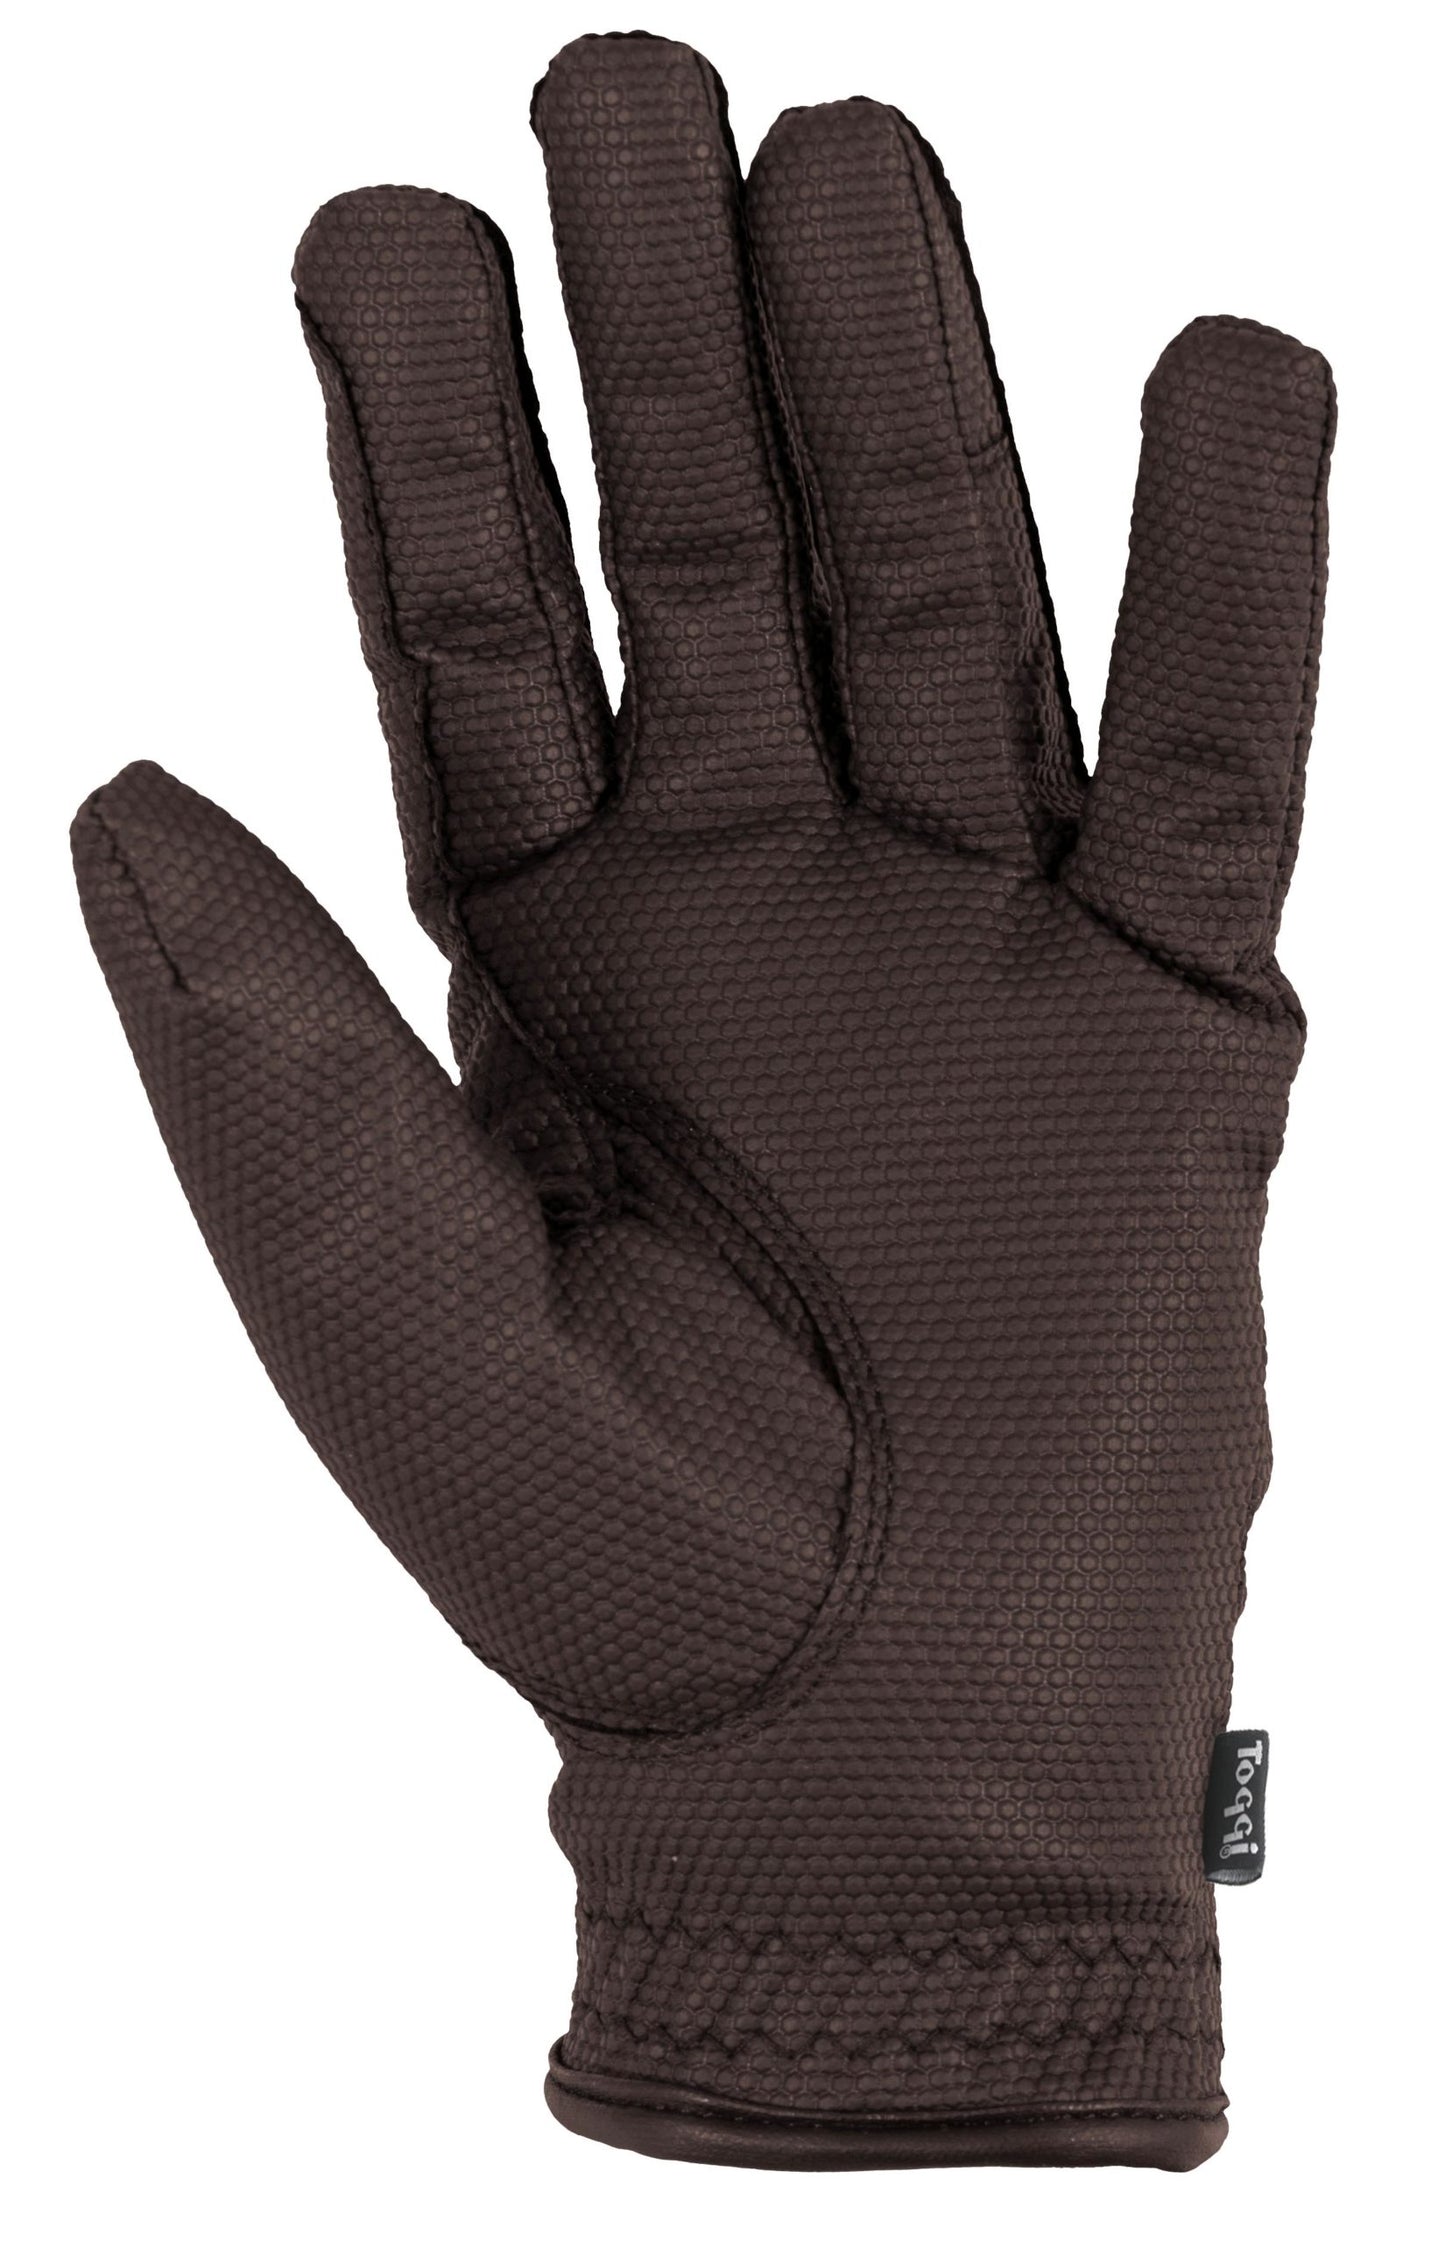 Toggi Leicester Black Thinsulate Lined Performance Gloves